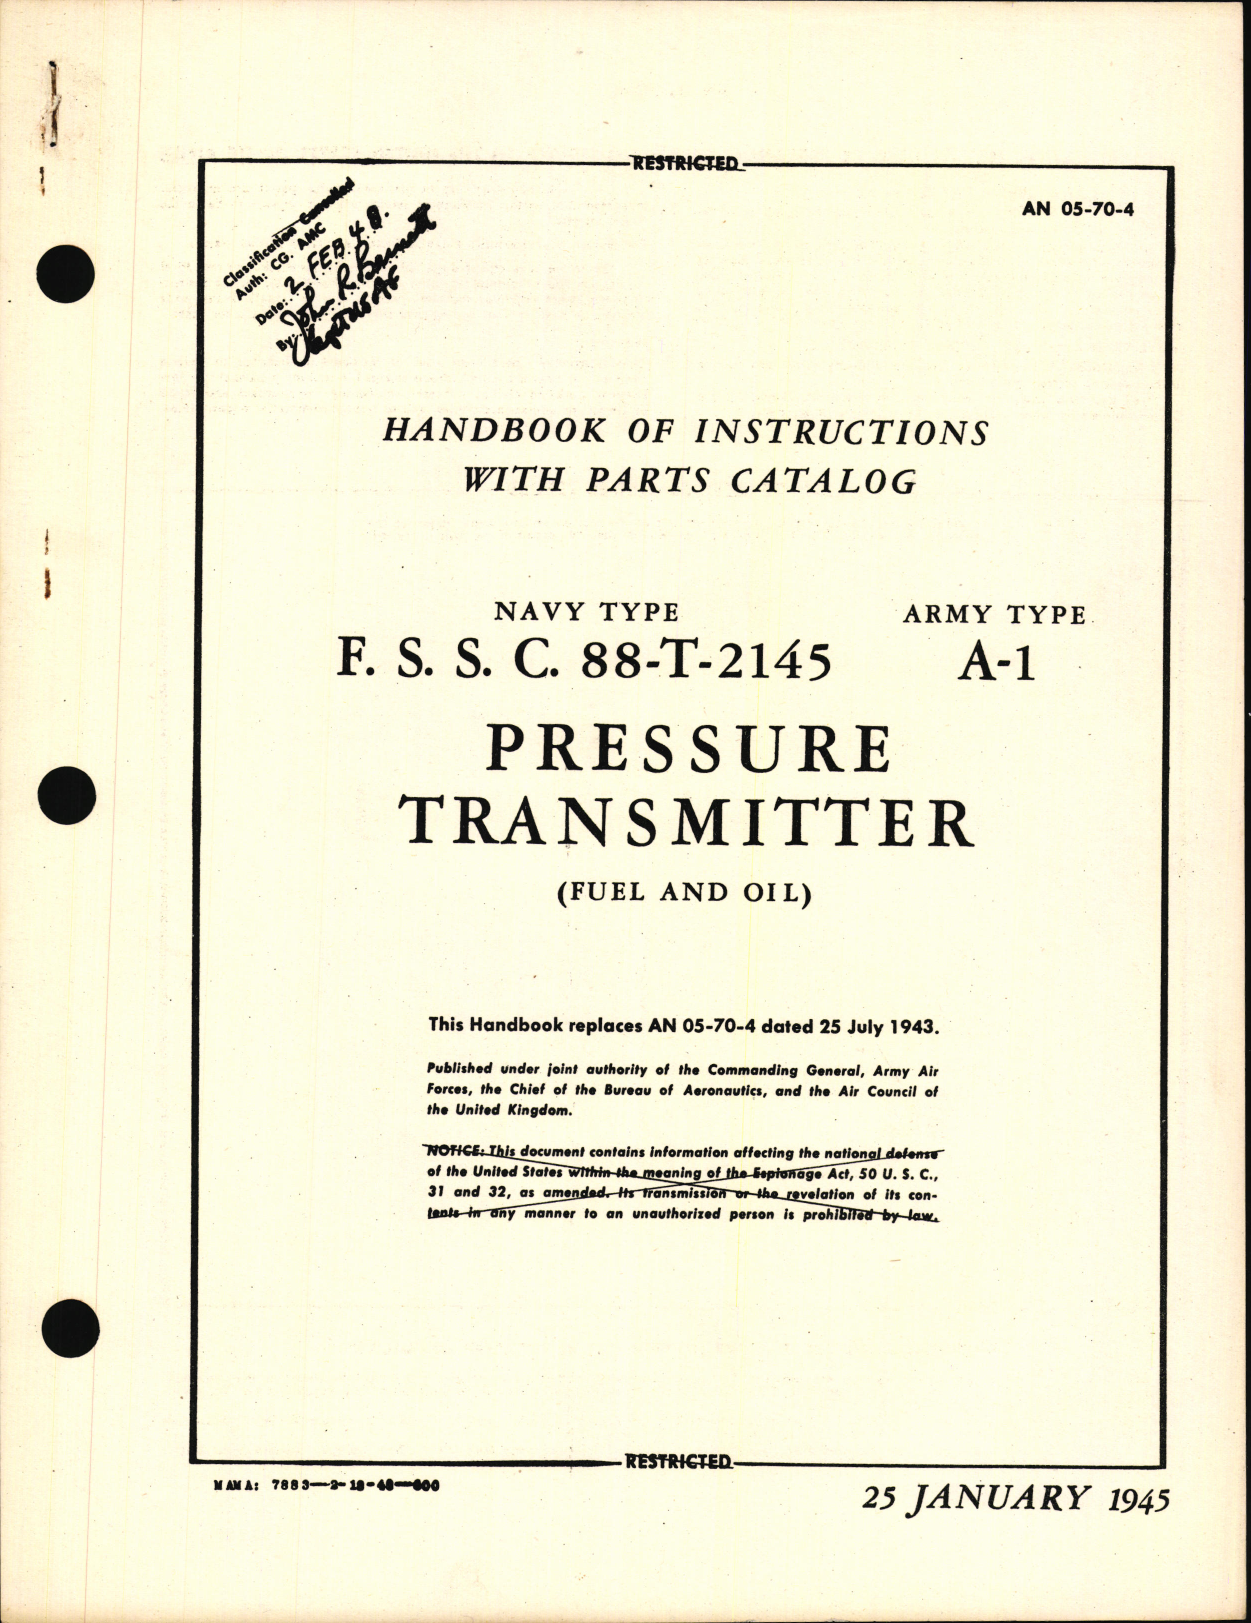 Sample page 1 from AirCorps Library document: Handbook of instructions with Parts Catalog for F.S.S.C. 88-T-2145 and A-1 Pressure Transmitter (Fuel & Oil)